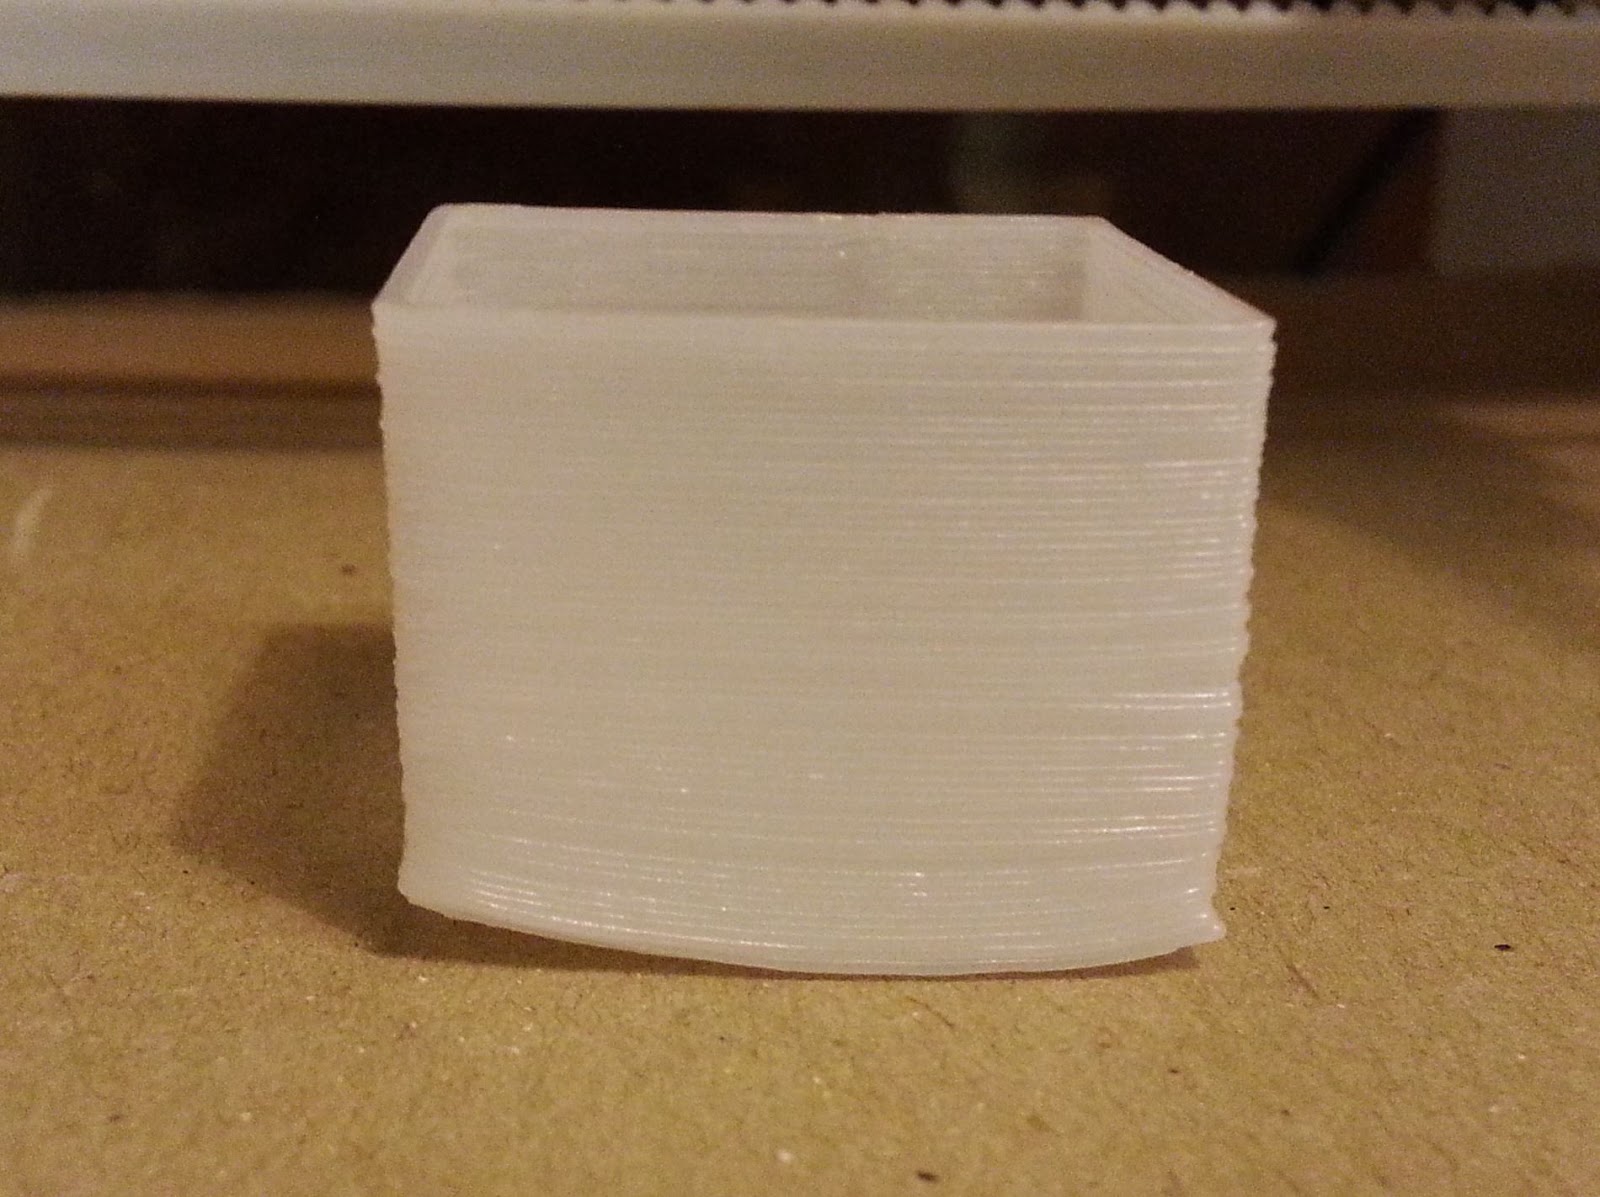 A 3D printed box that is warped